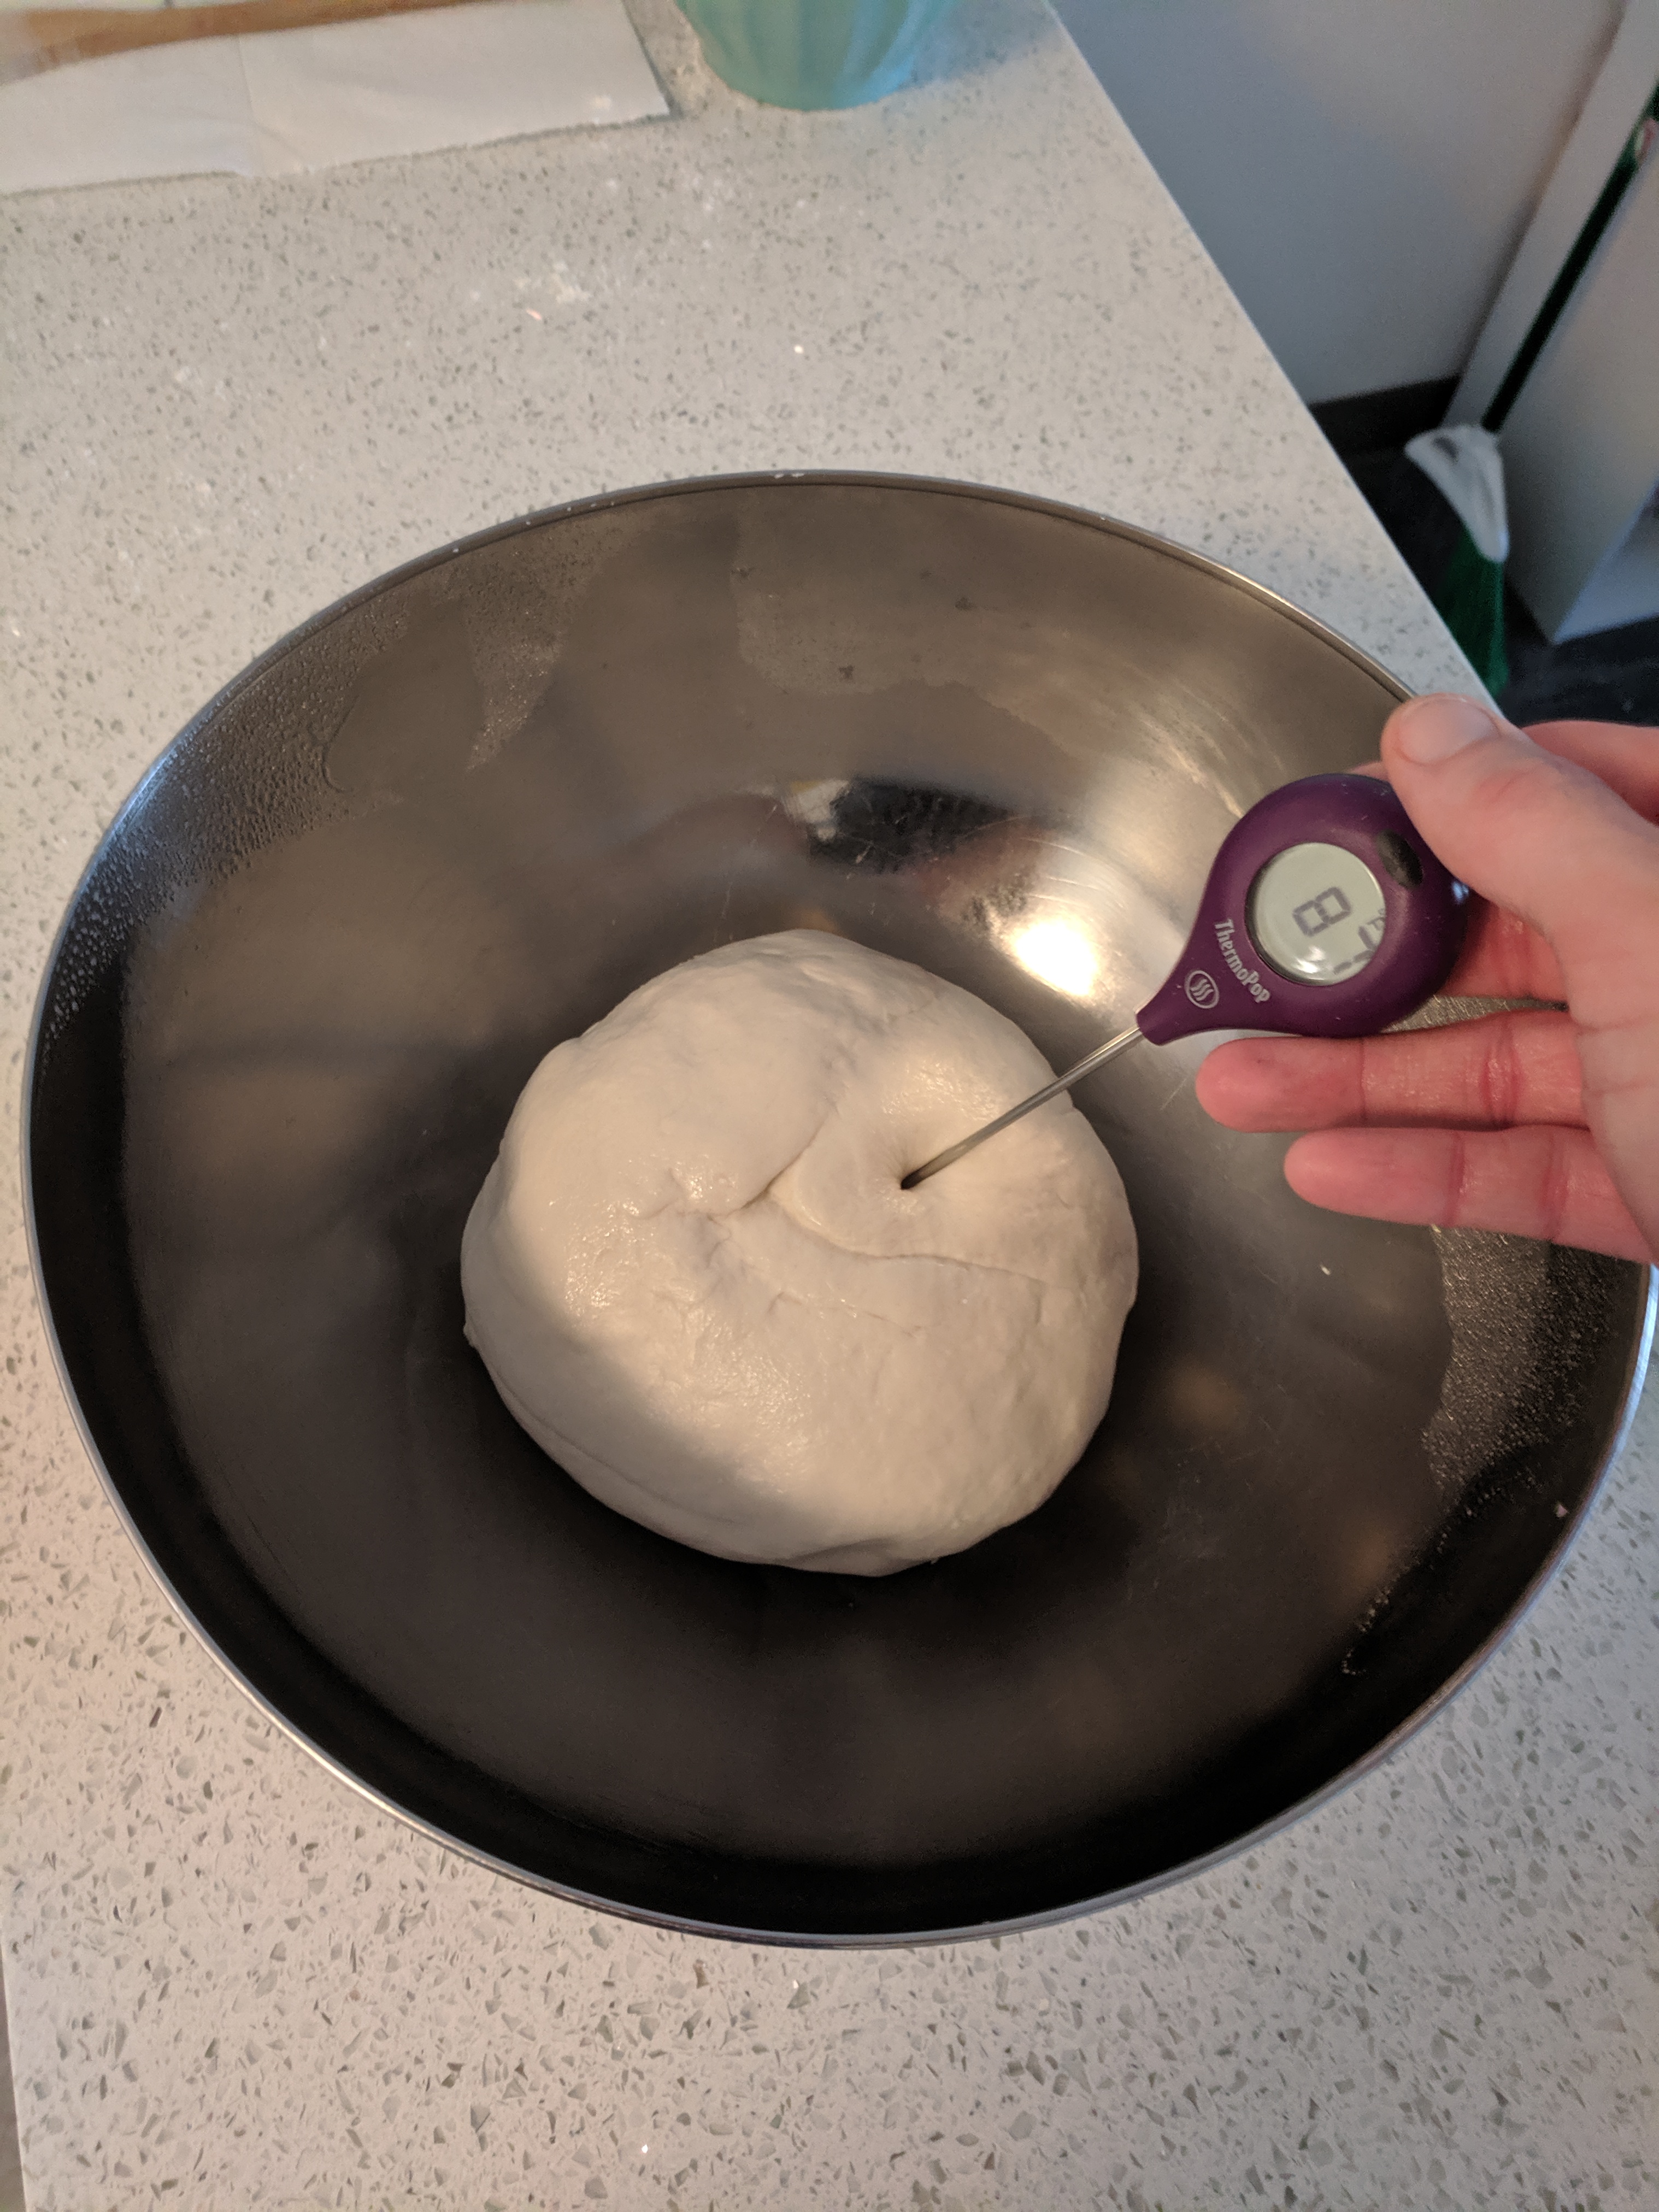 A thermometer, pushed into a ball of kneaded dough, reads "87º".